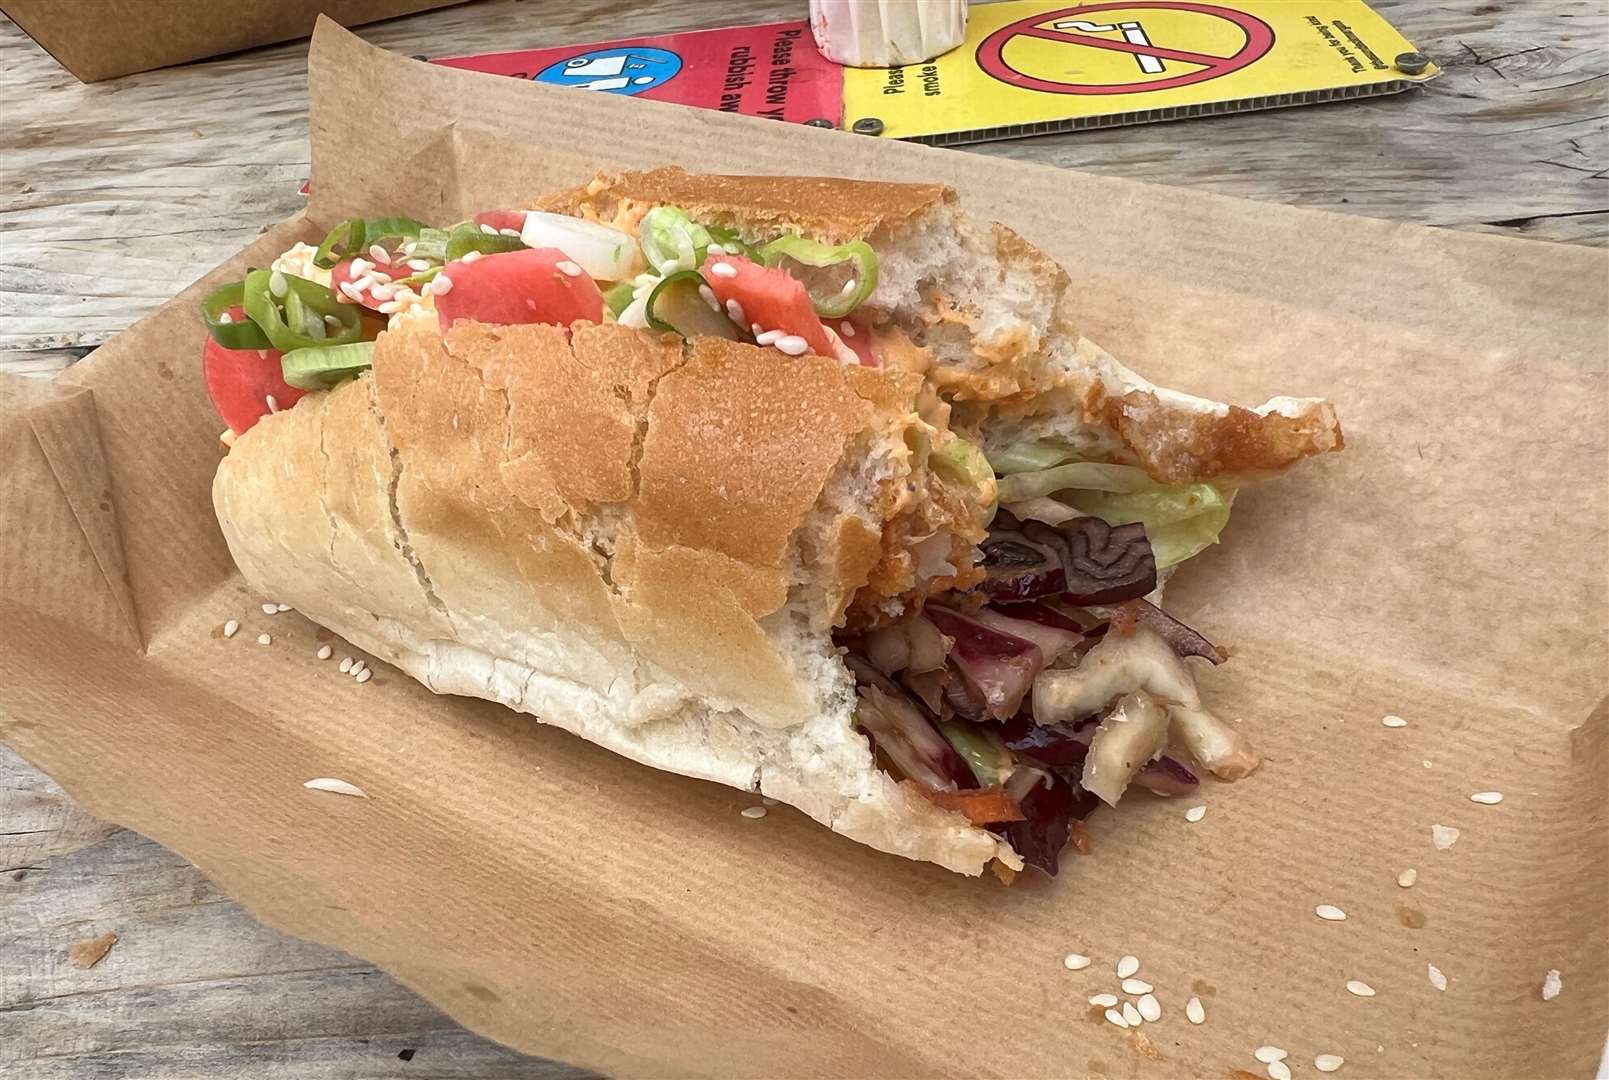 There's plenty of filling in these sandwiches, er, I mean po'boys